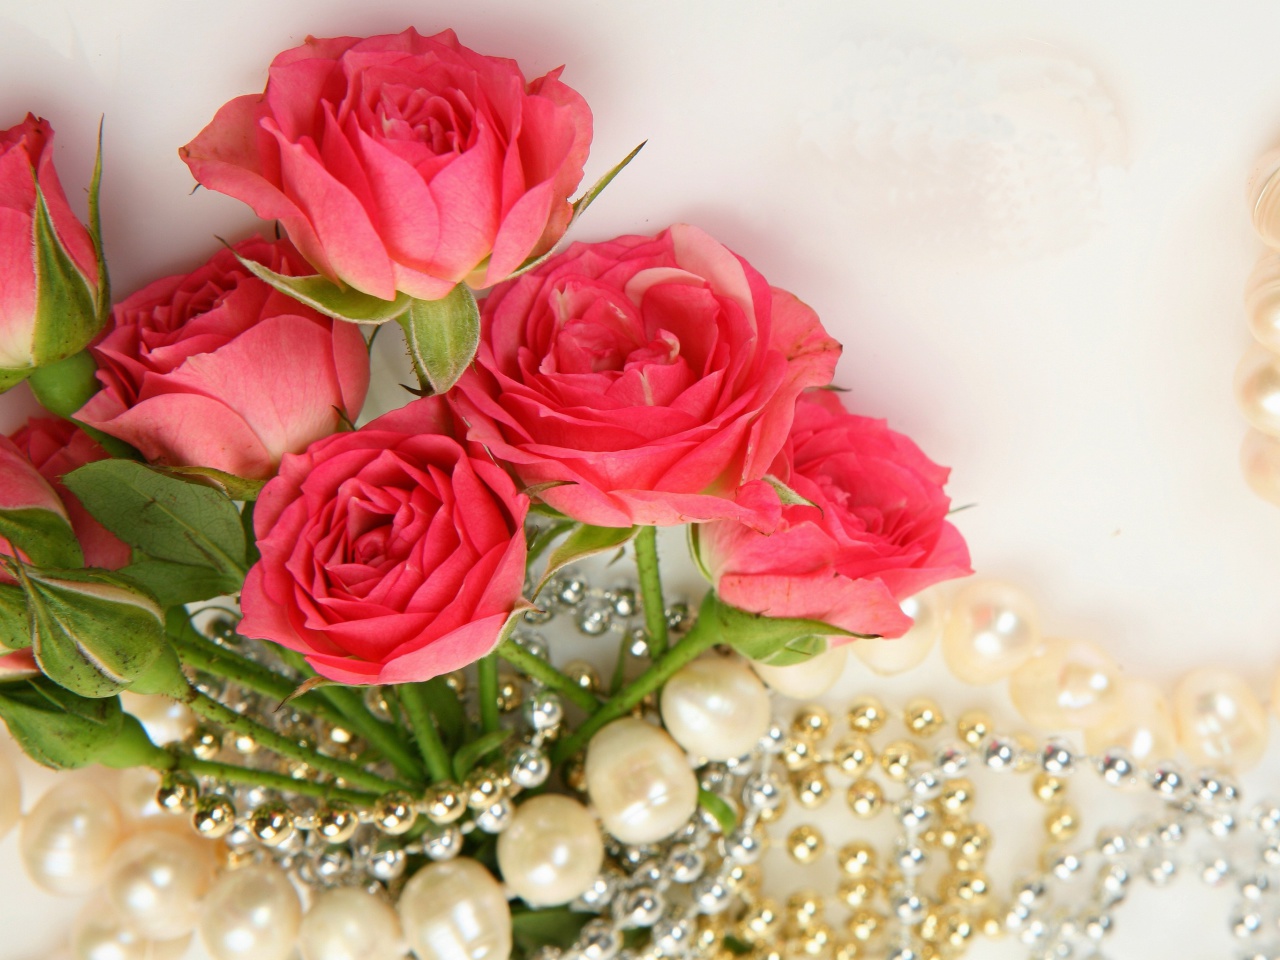 Das Necklace and Roses Bouquet Wallpaper 1280x960